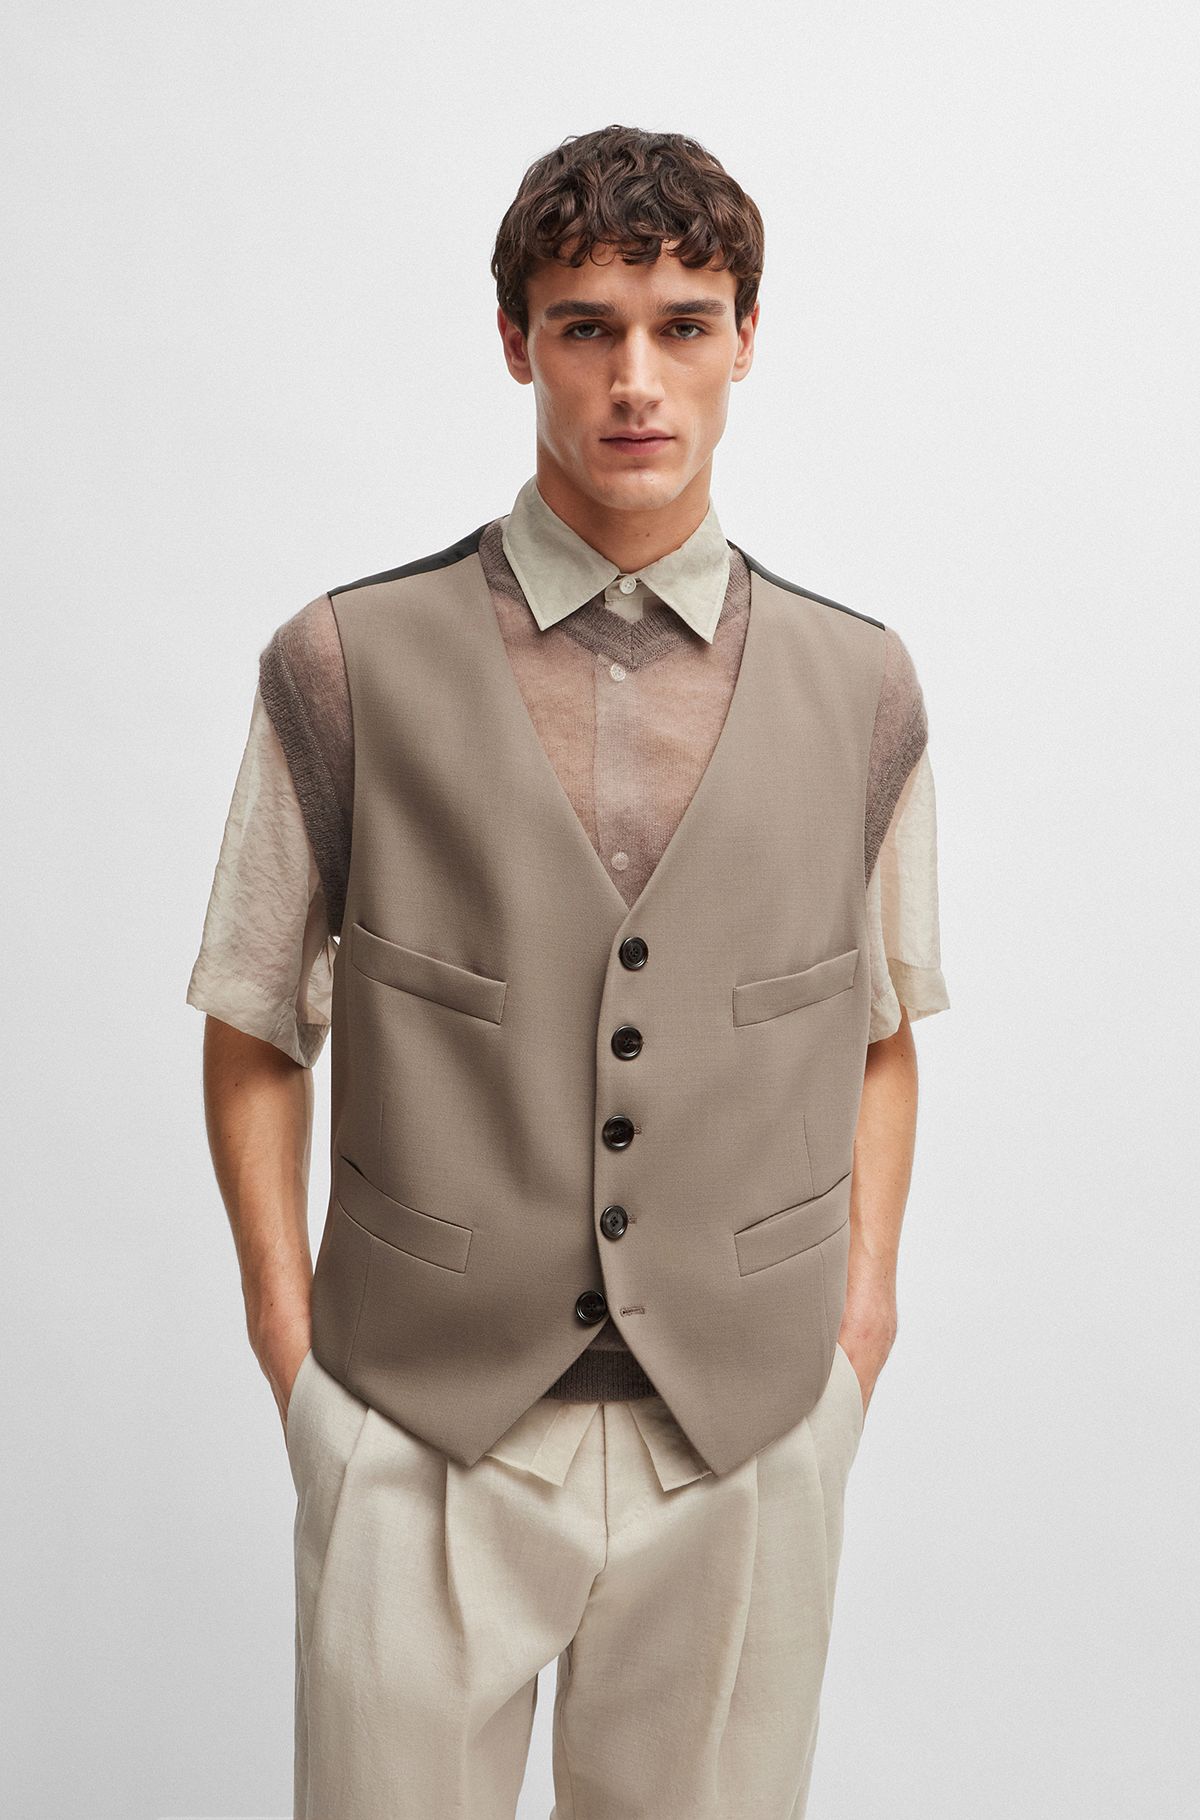 Five-button waistcoat in stretch wool and adjustable strap, Beige